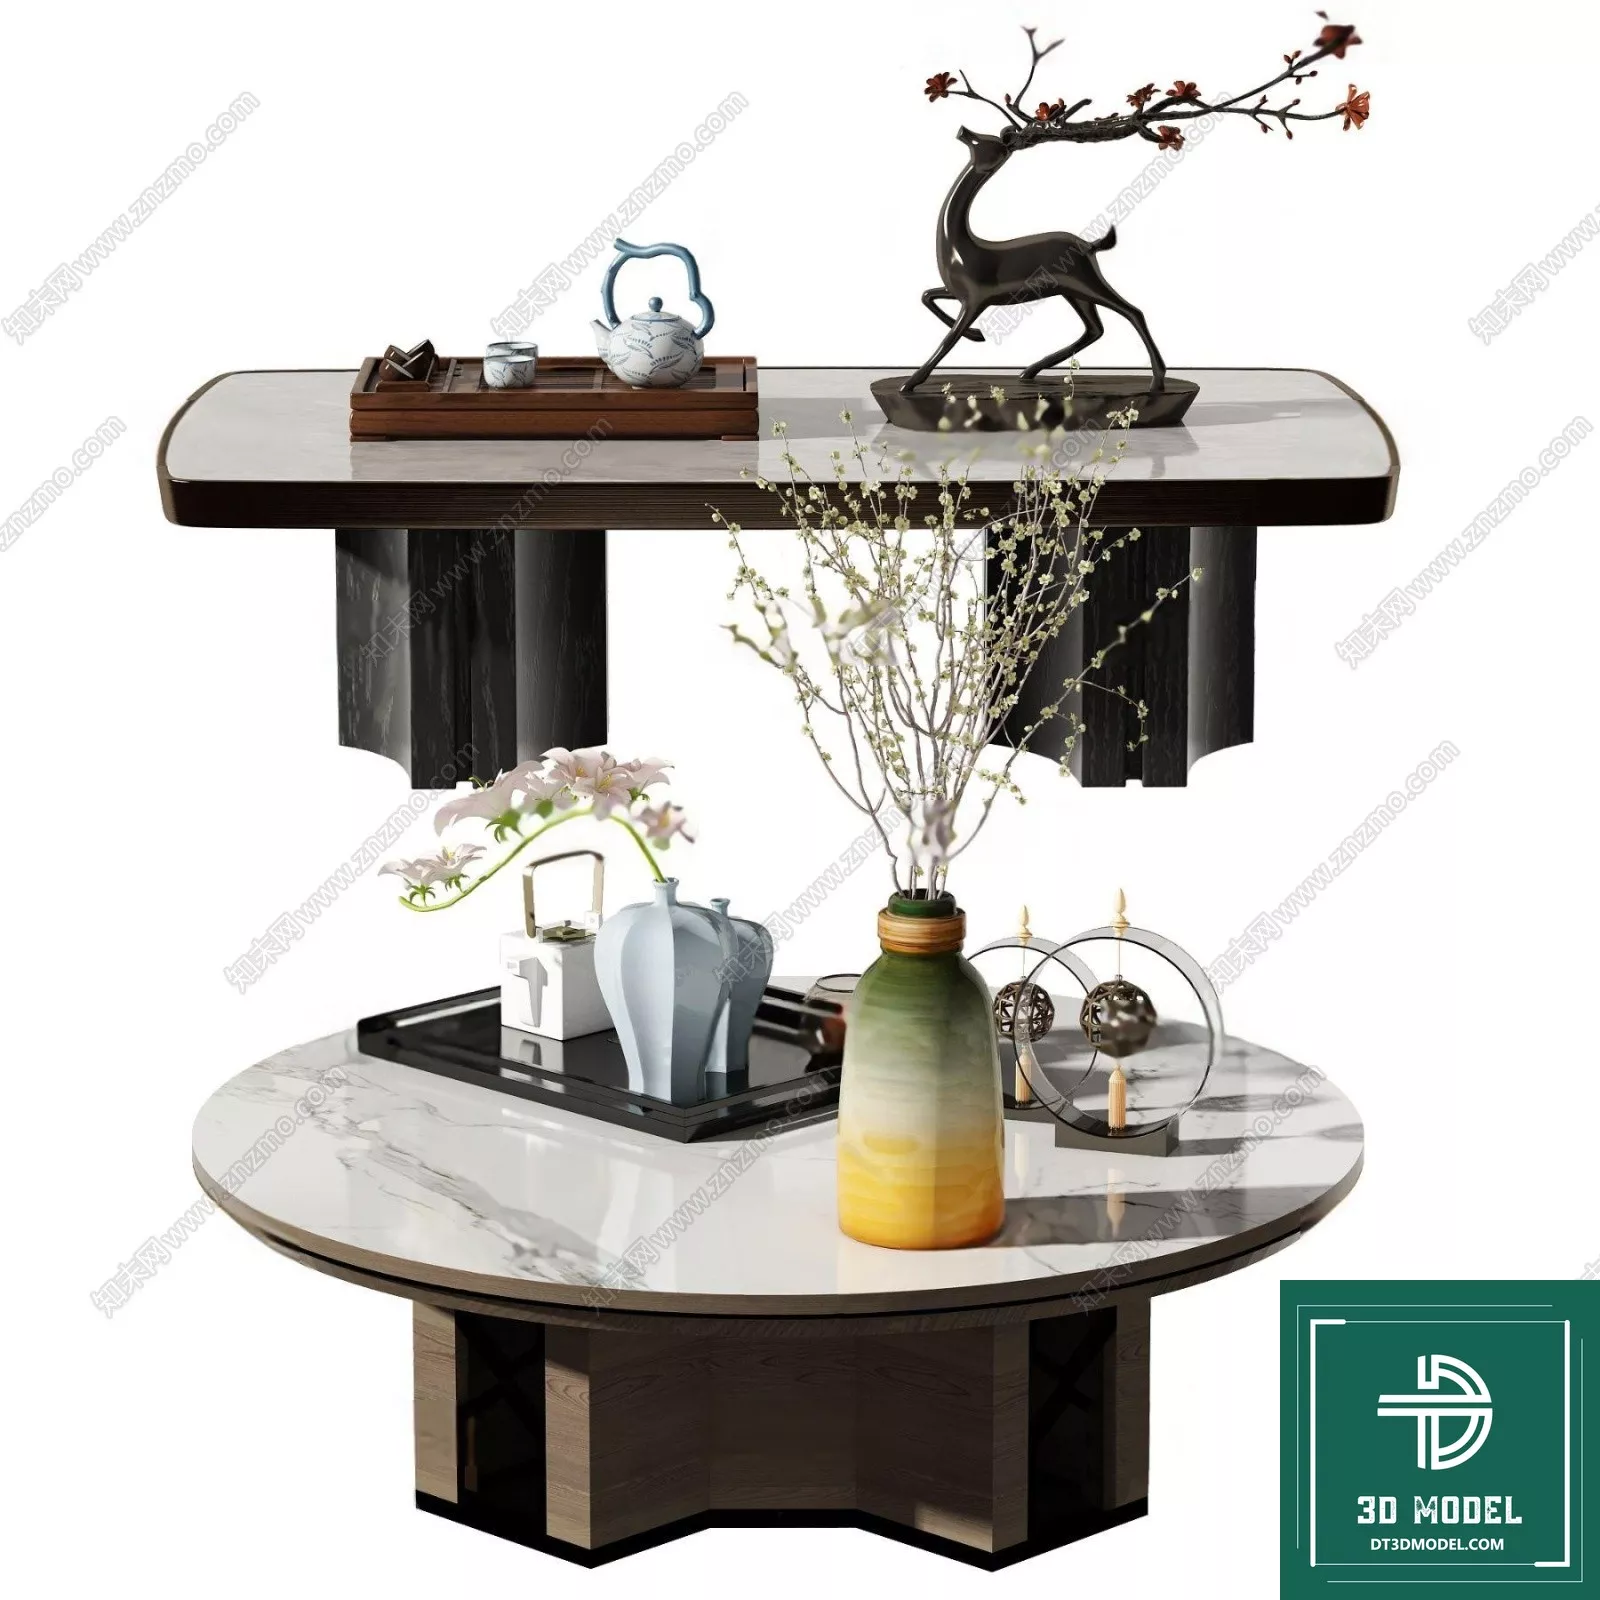 MODERN TEA TABLE - SKETCHUP 3D MODEL - VRAY OR ENSCAPE - ID14903